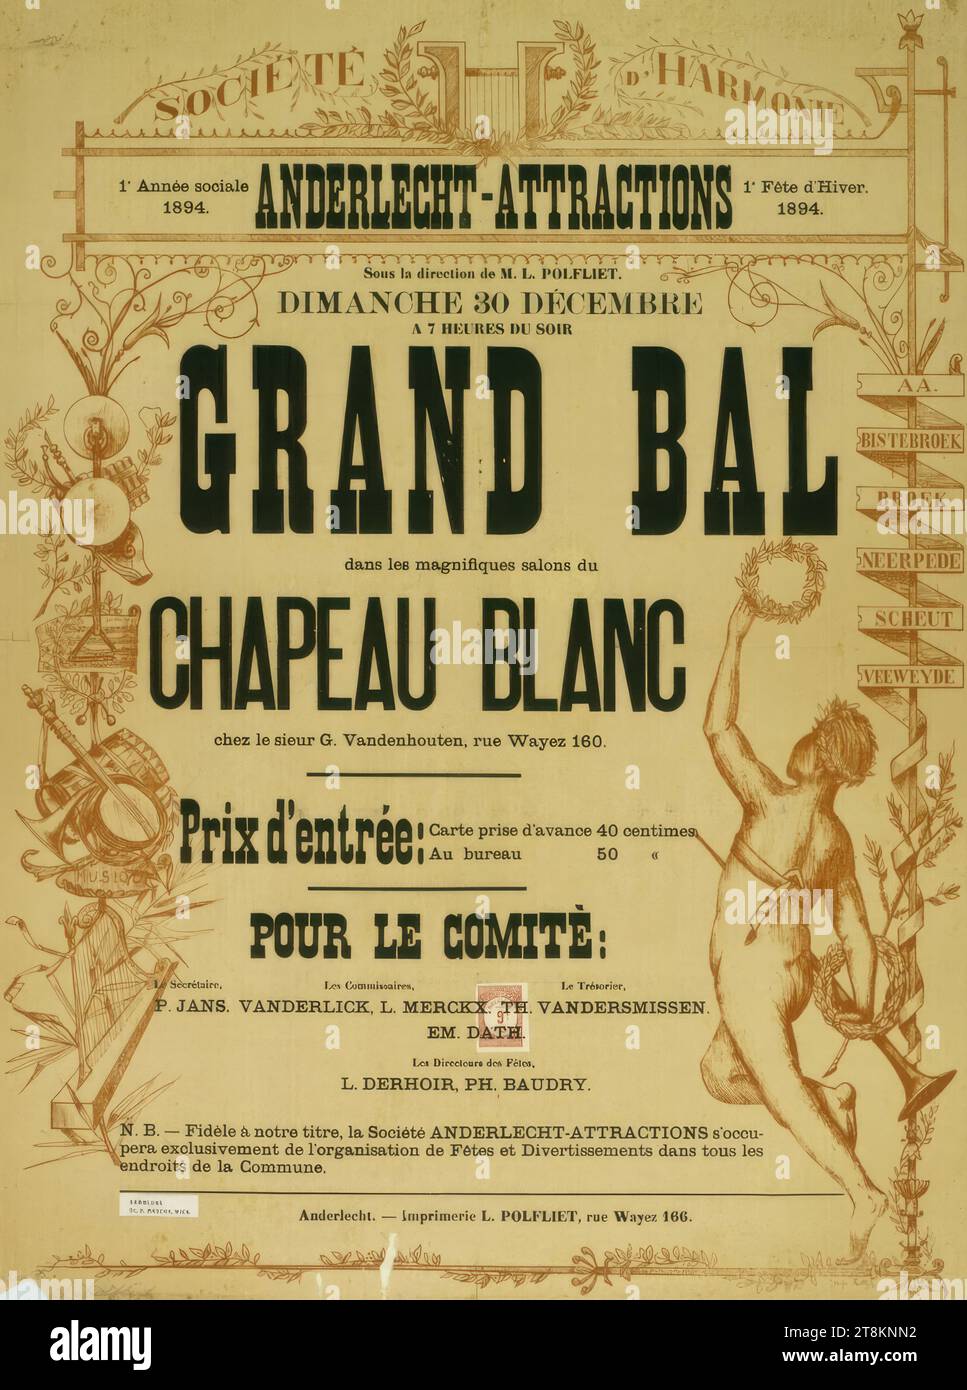 ANDERLECHT ATTRACTIONS; 1894; GRAND BAL in the magnifiques salons du CHAPEAU BLANC, Anonymous, 1894, print, lithograph, sheet: 730 mm x 550 mm Stock Photo